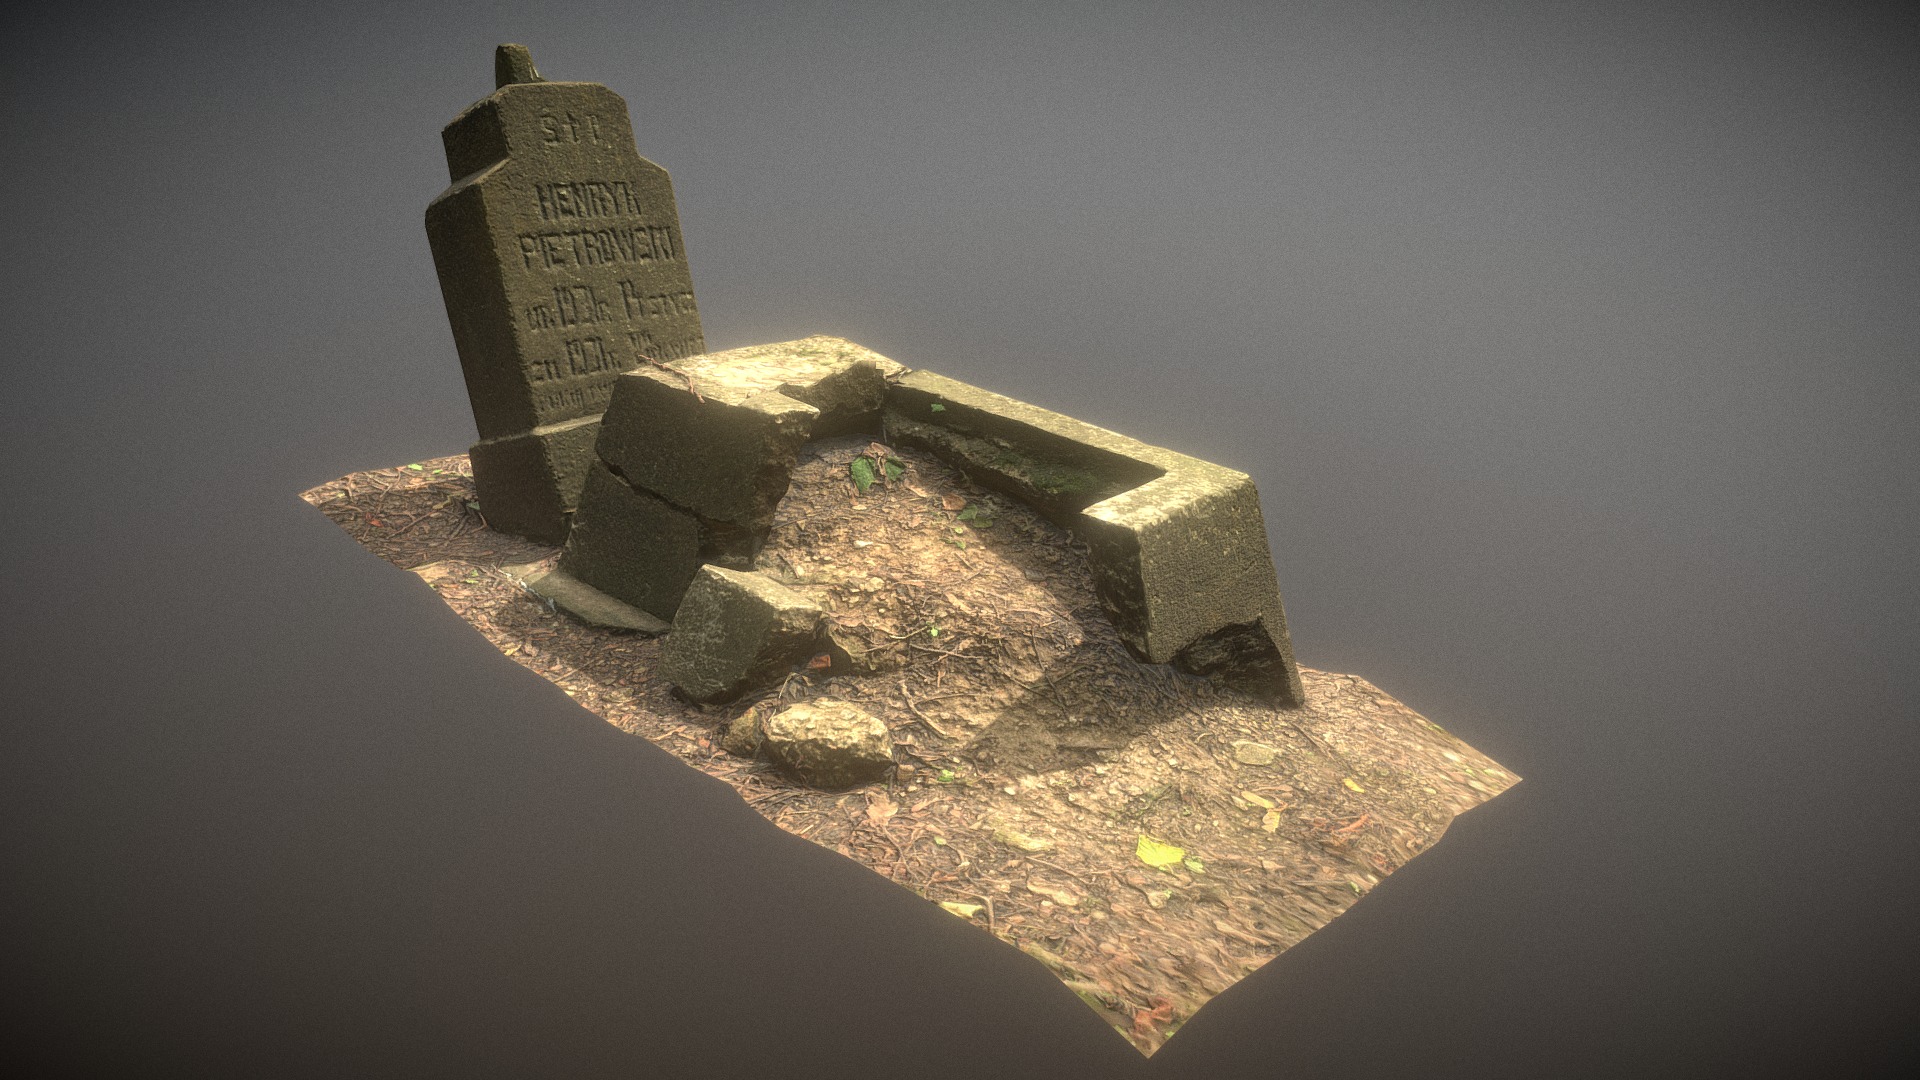 3D model Photorealistic Scanned Broken Grave LOD 0-3 - This is a 3D model of the Photorealistic Scanned Broken Grave LOD 0-3. The 3D model is about a stone structure with a sign on it.